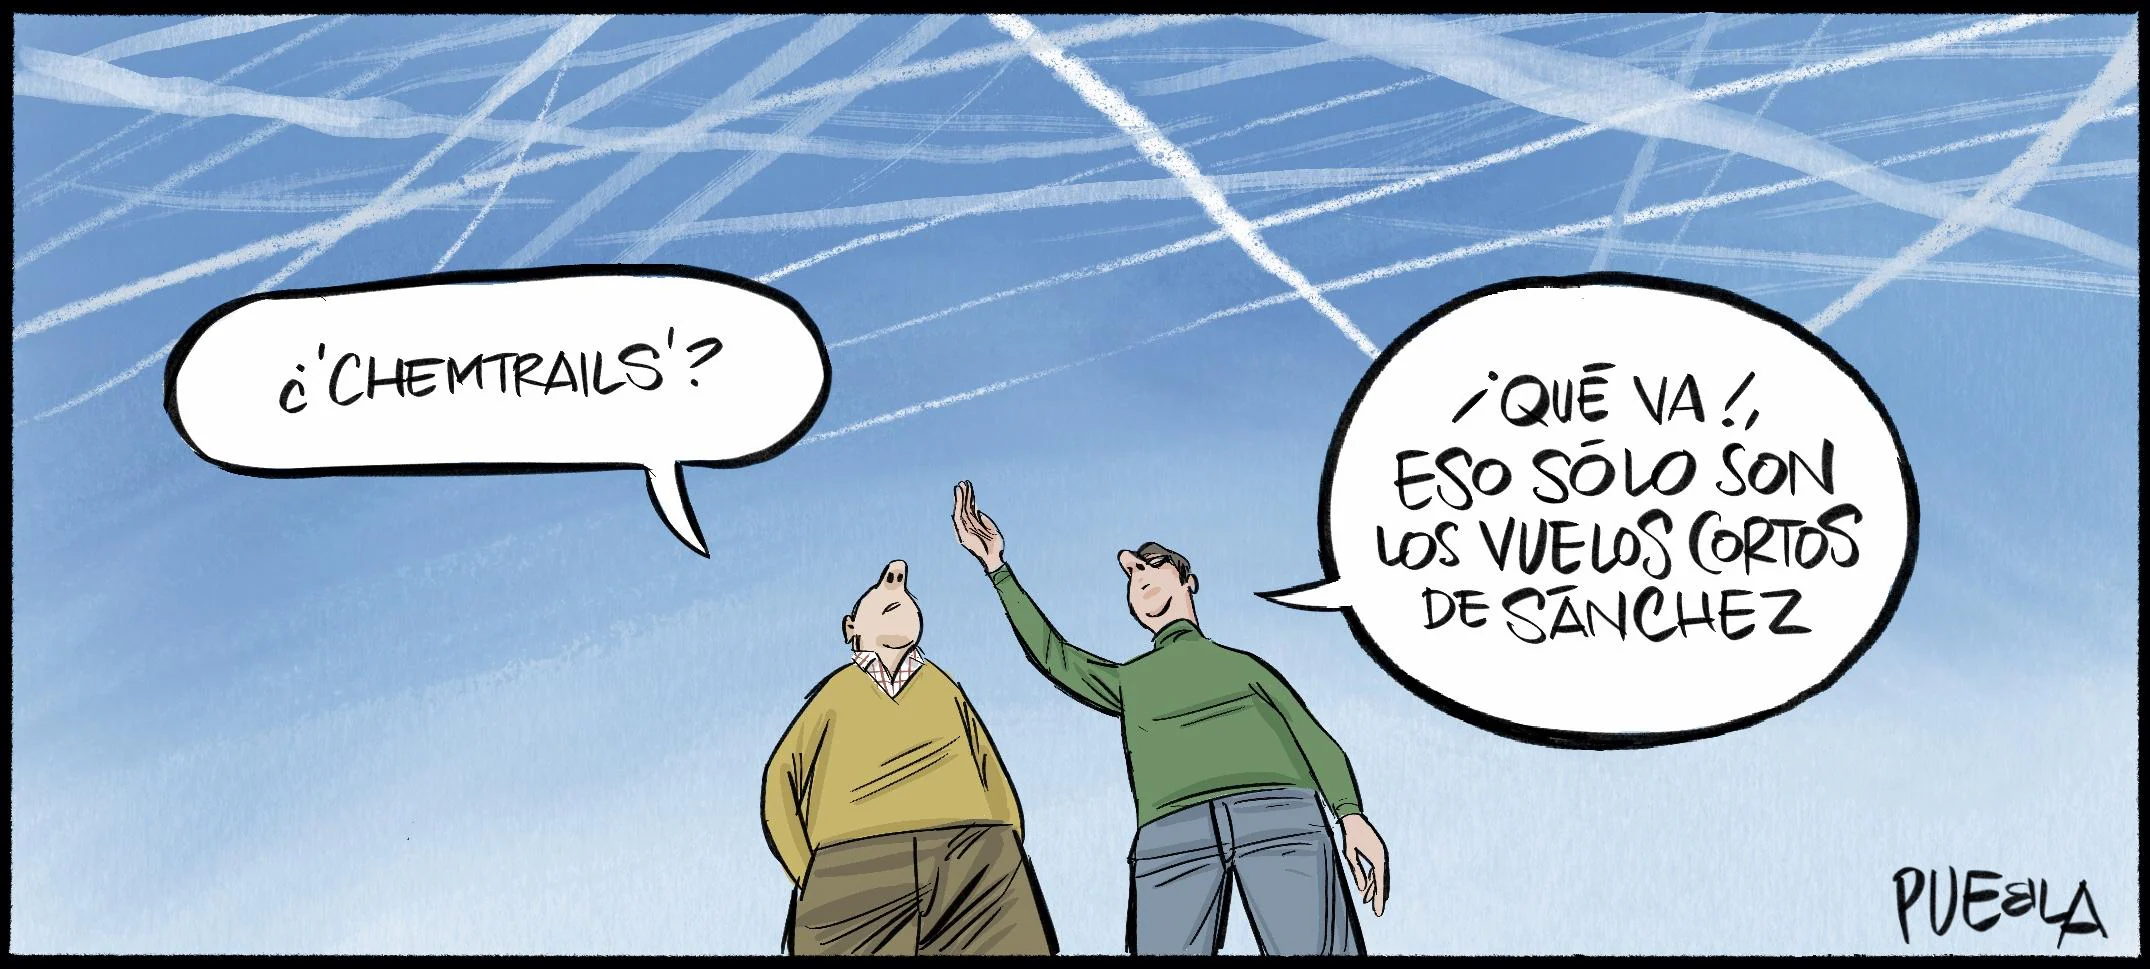 ¿’Chemtrails’?